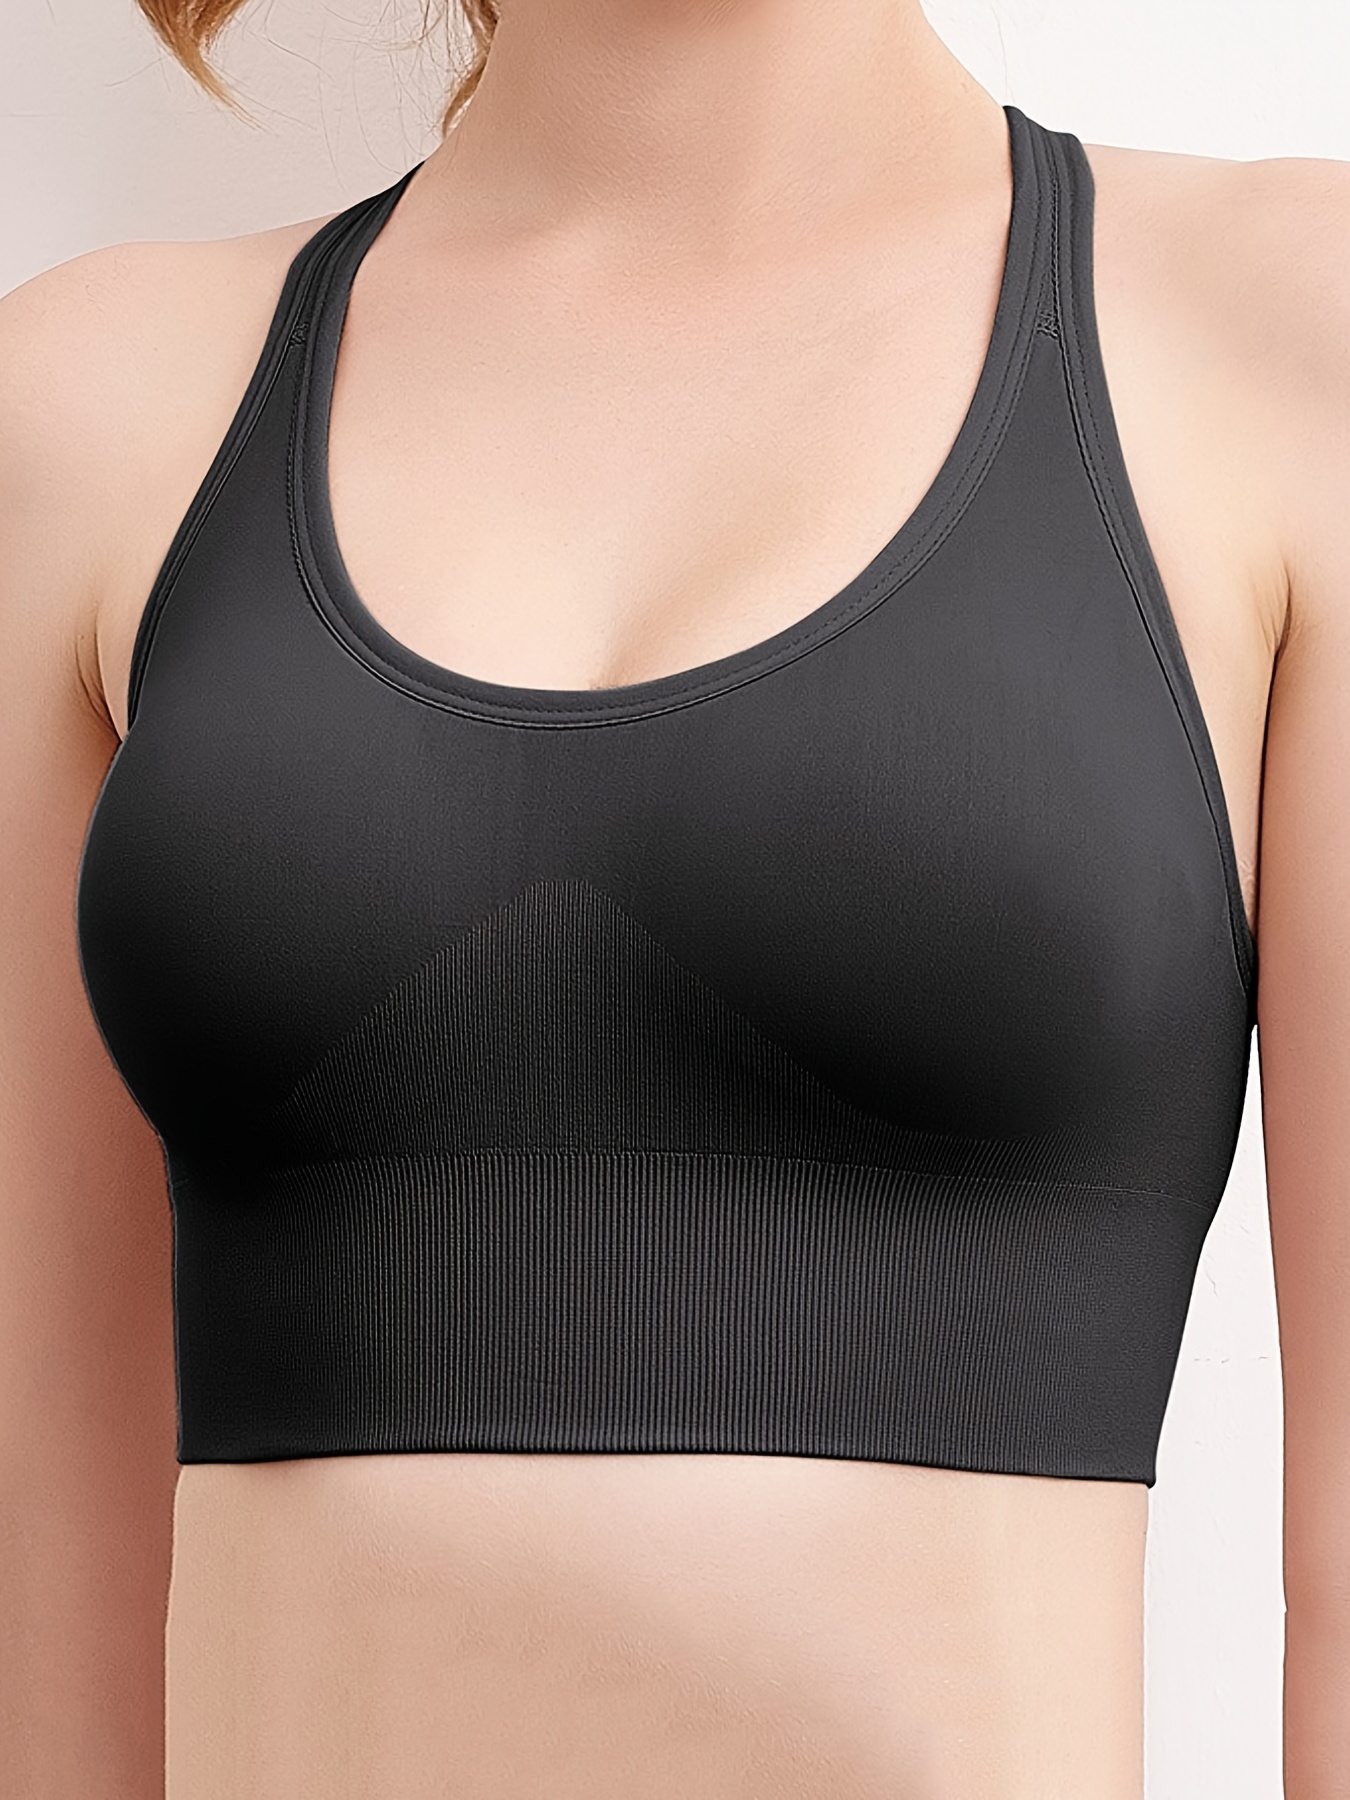 Women's Breathable Elastic Sports Bra Stretch Athletic Brassiere Push Up  Bras